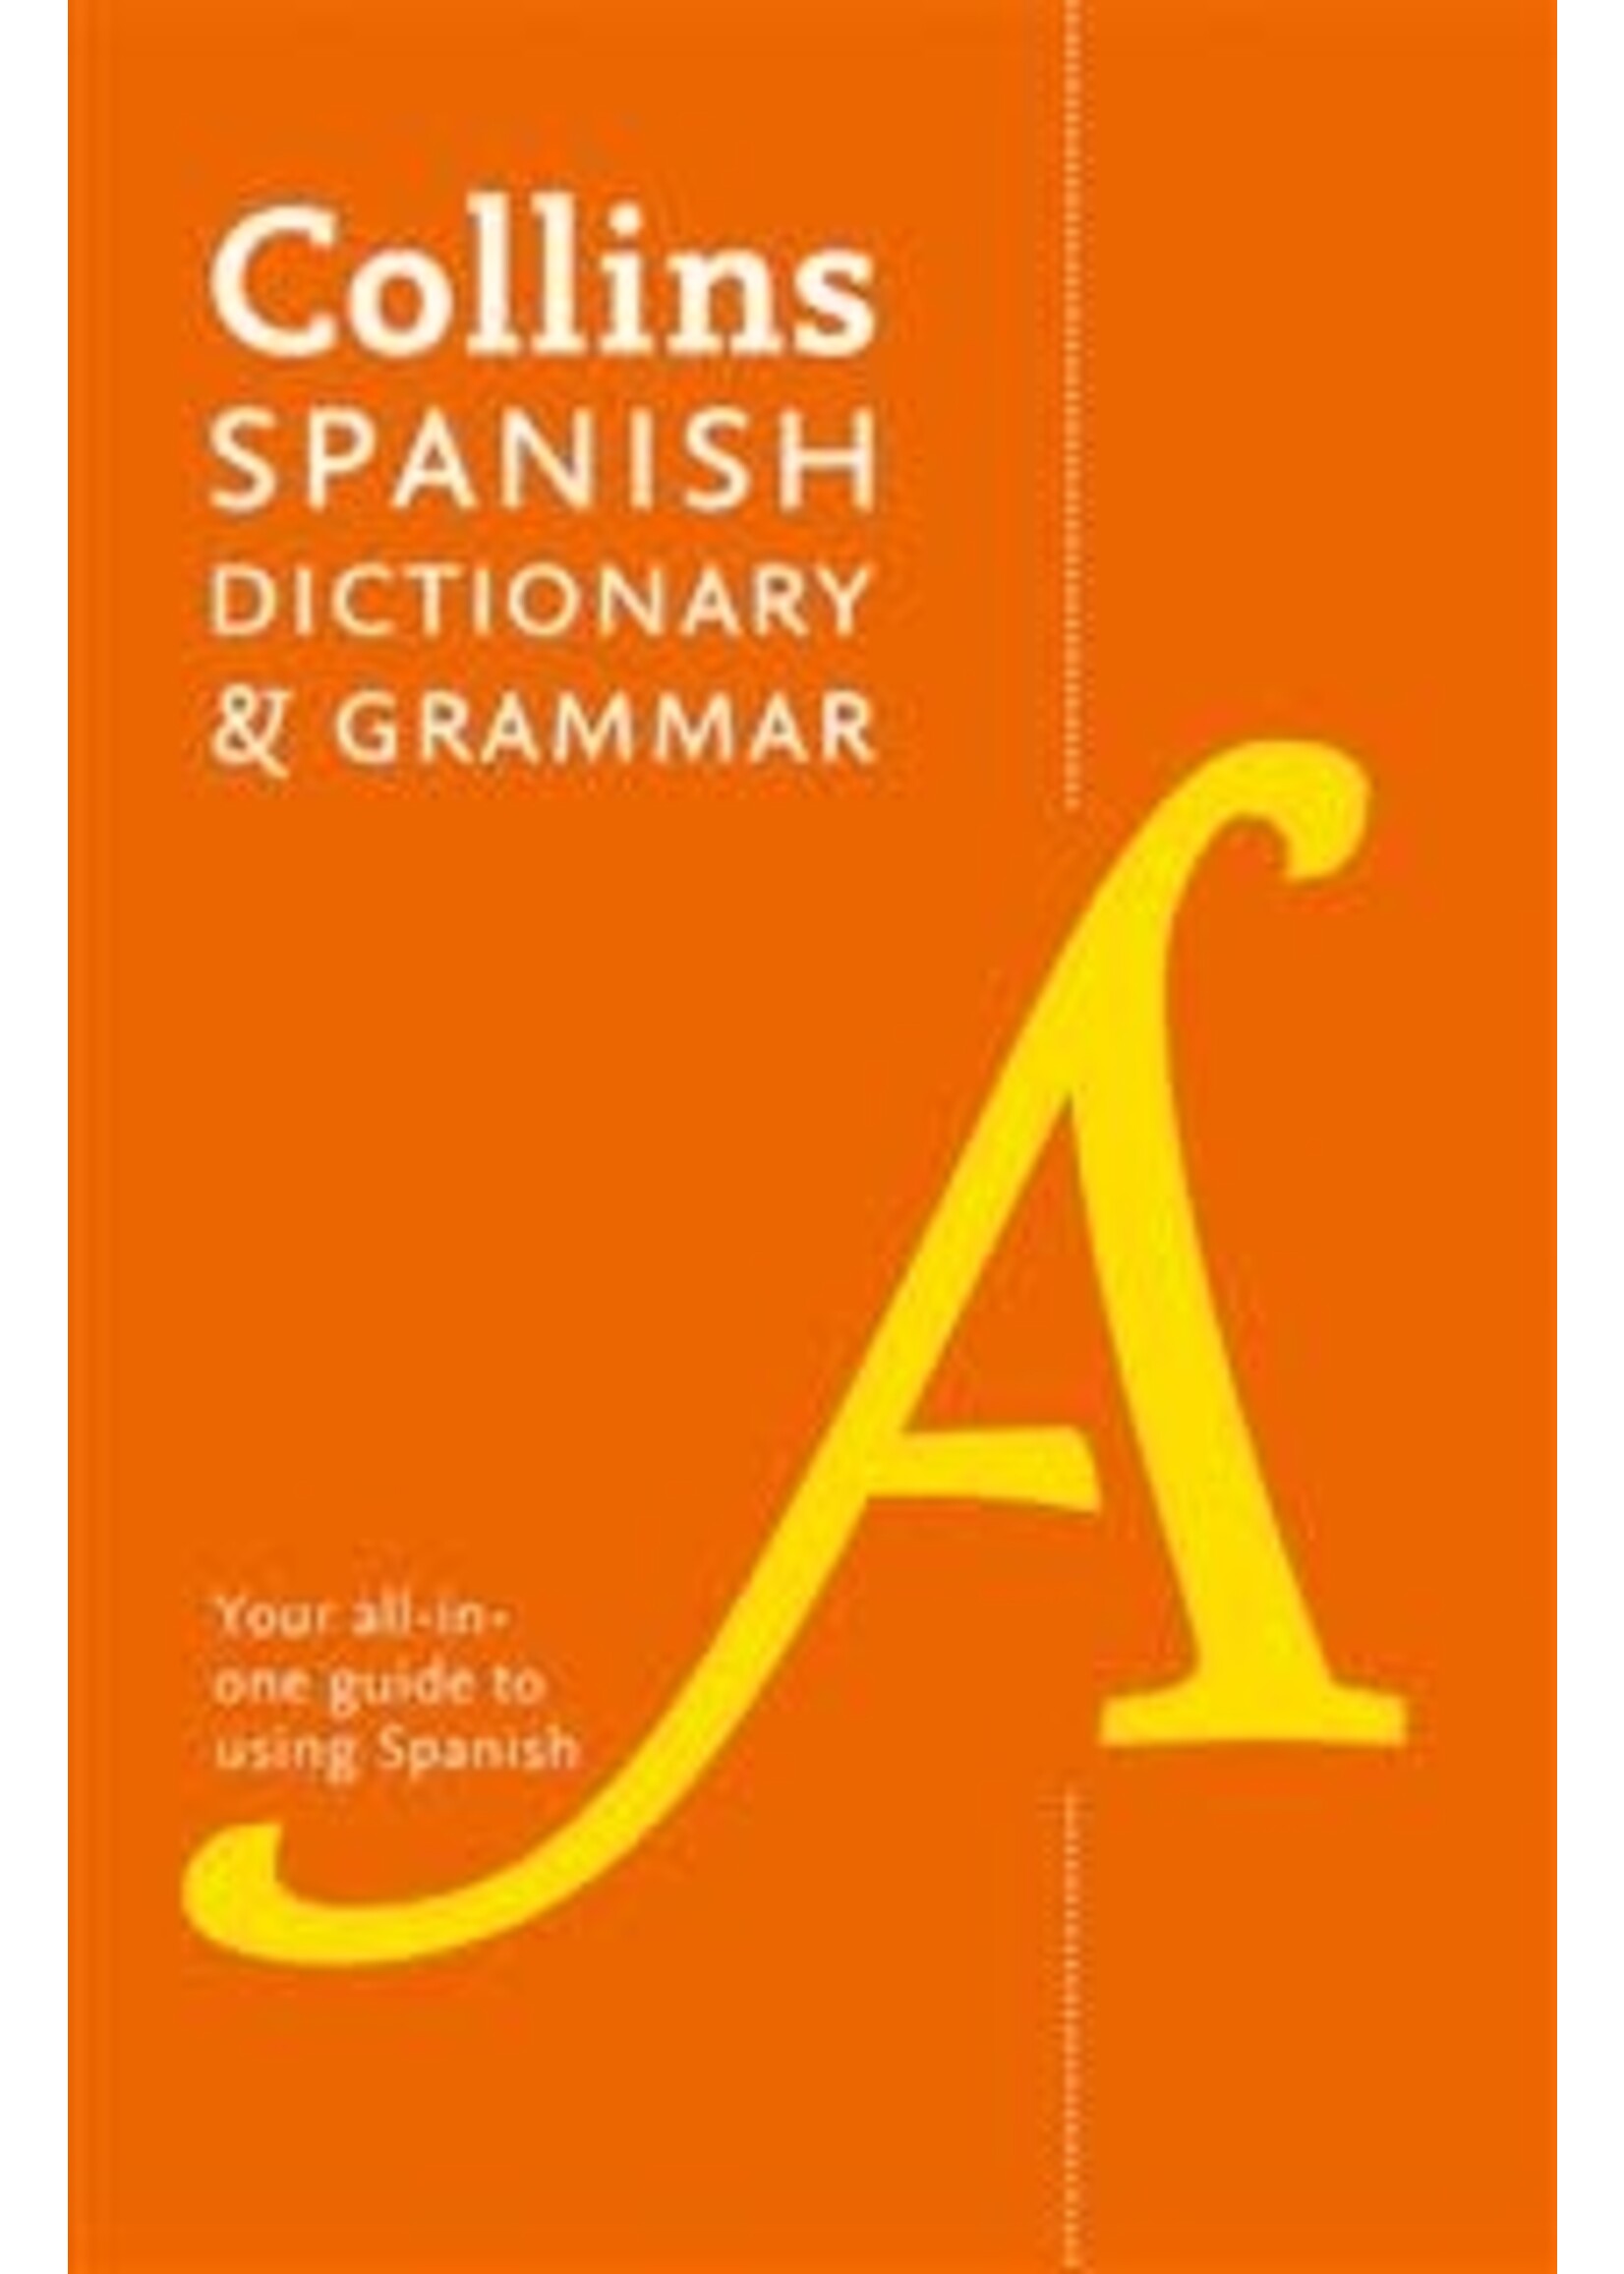 Spanish Dictionary and Grammar: Two books in one Eighth ed. by Collins Dictionaries